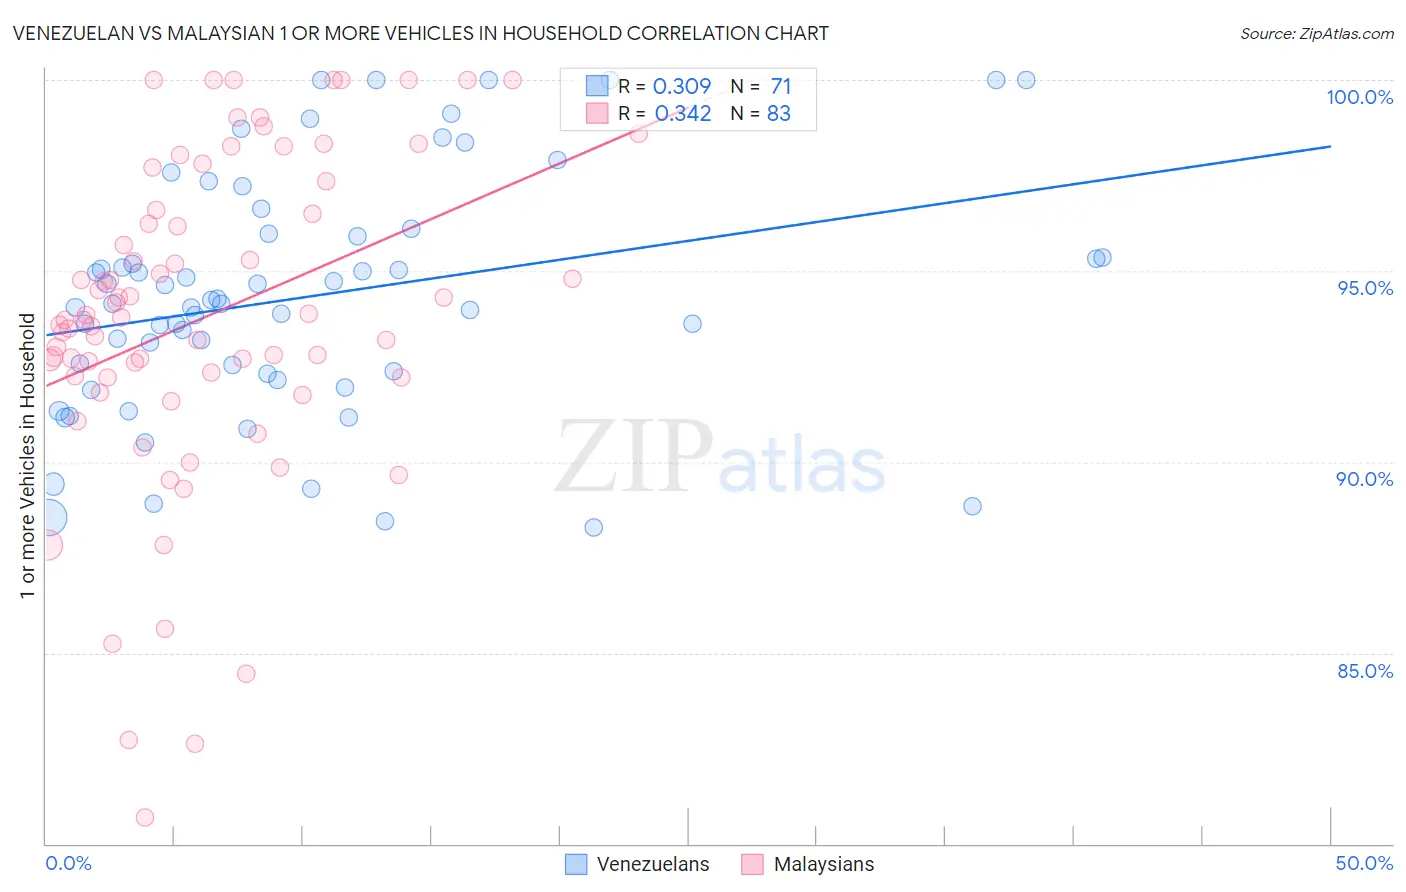 Venezuelan vs Malaysian 1 or more Vehicles in Household